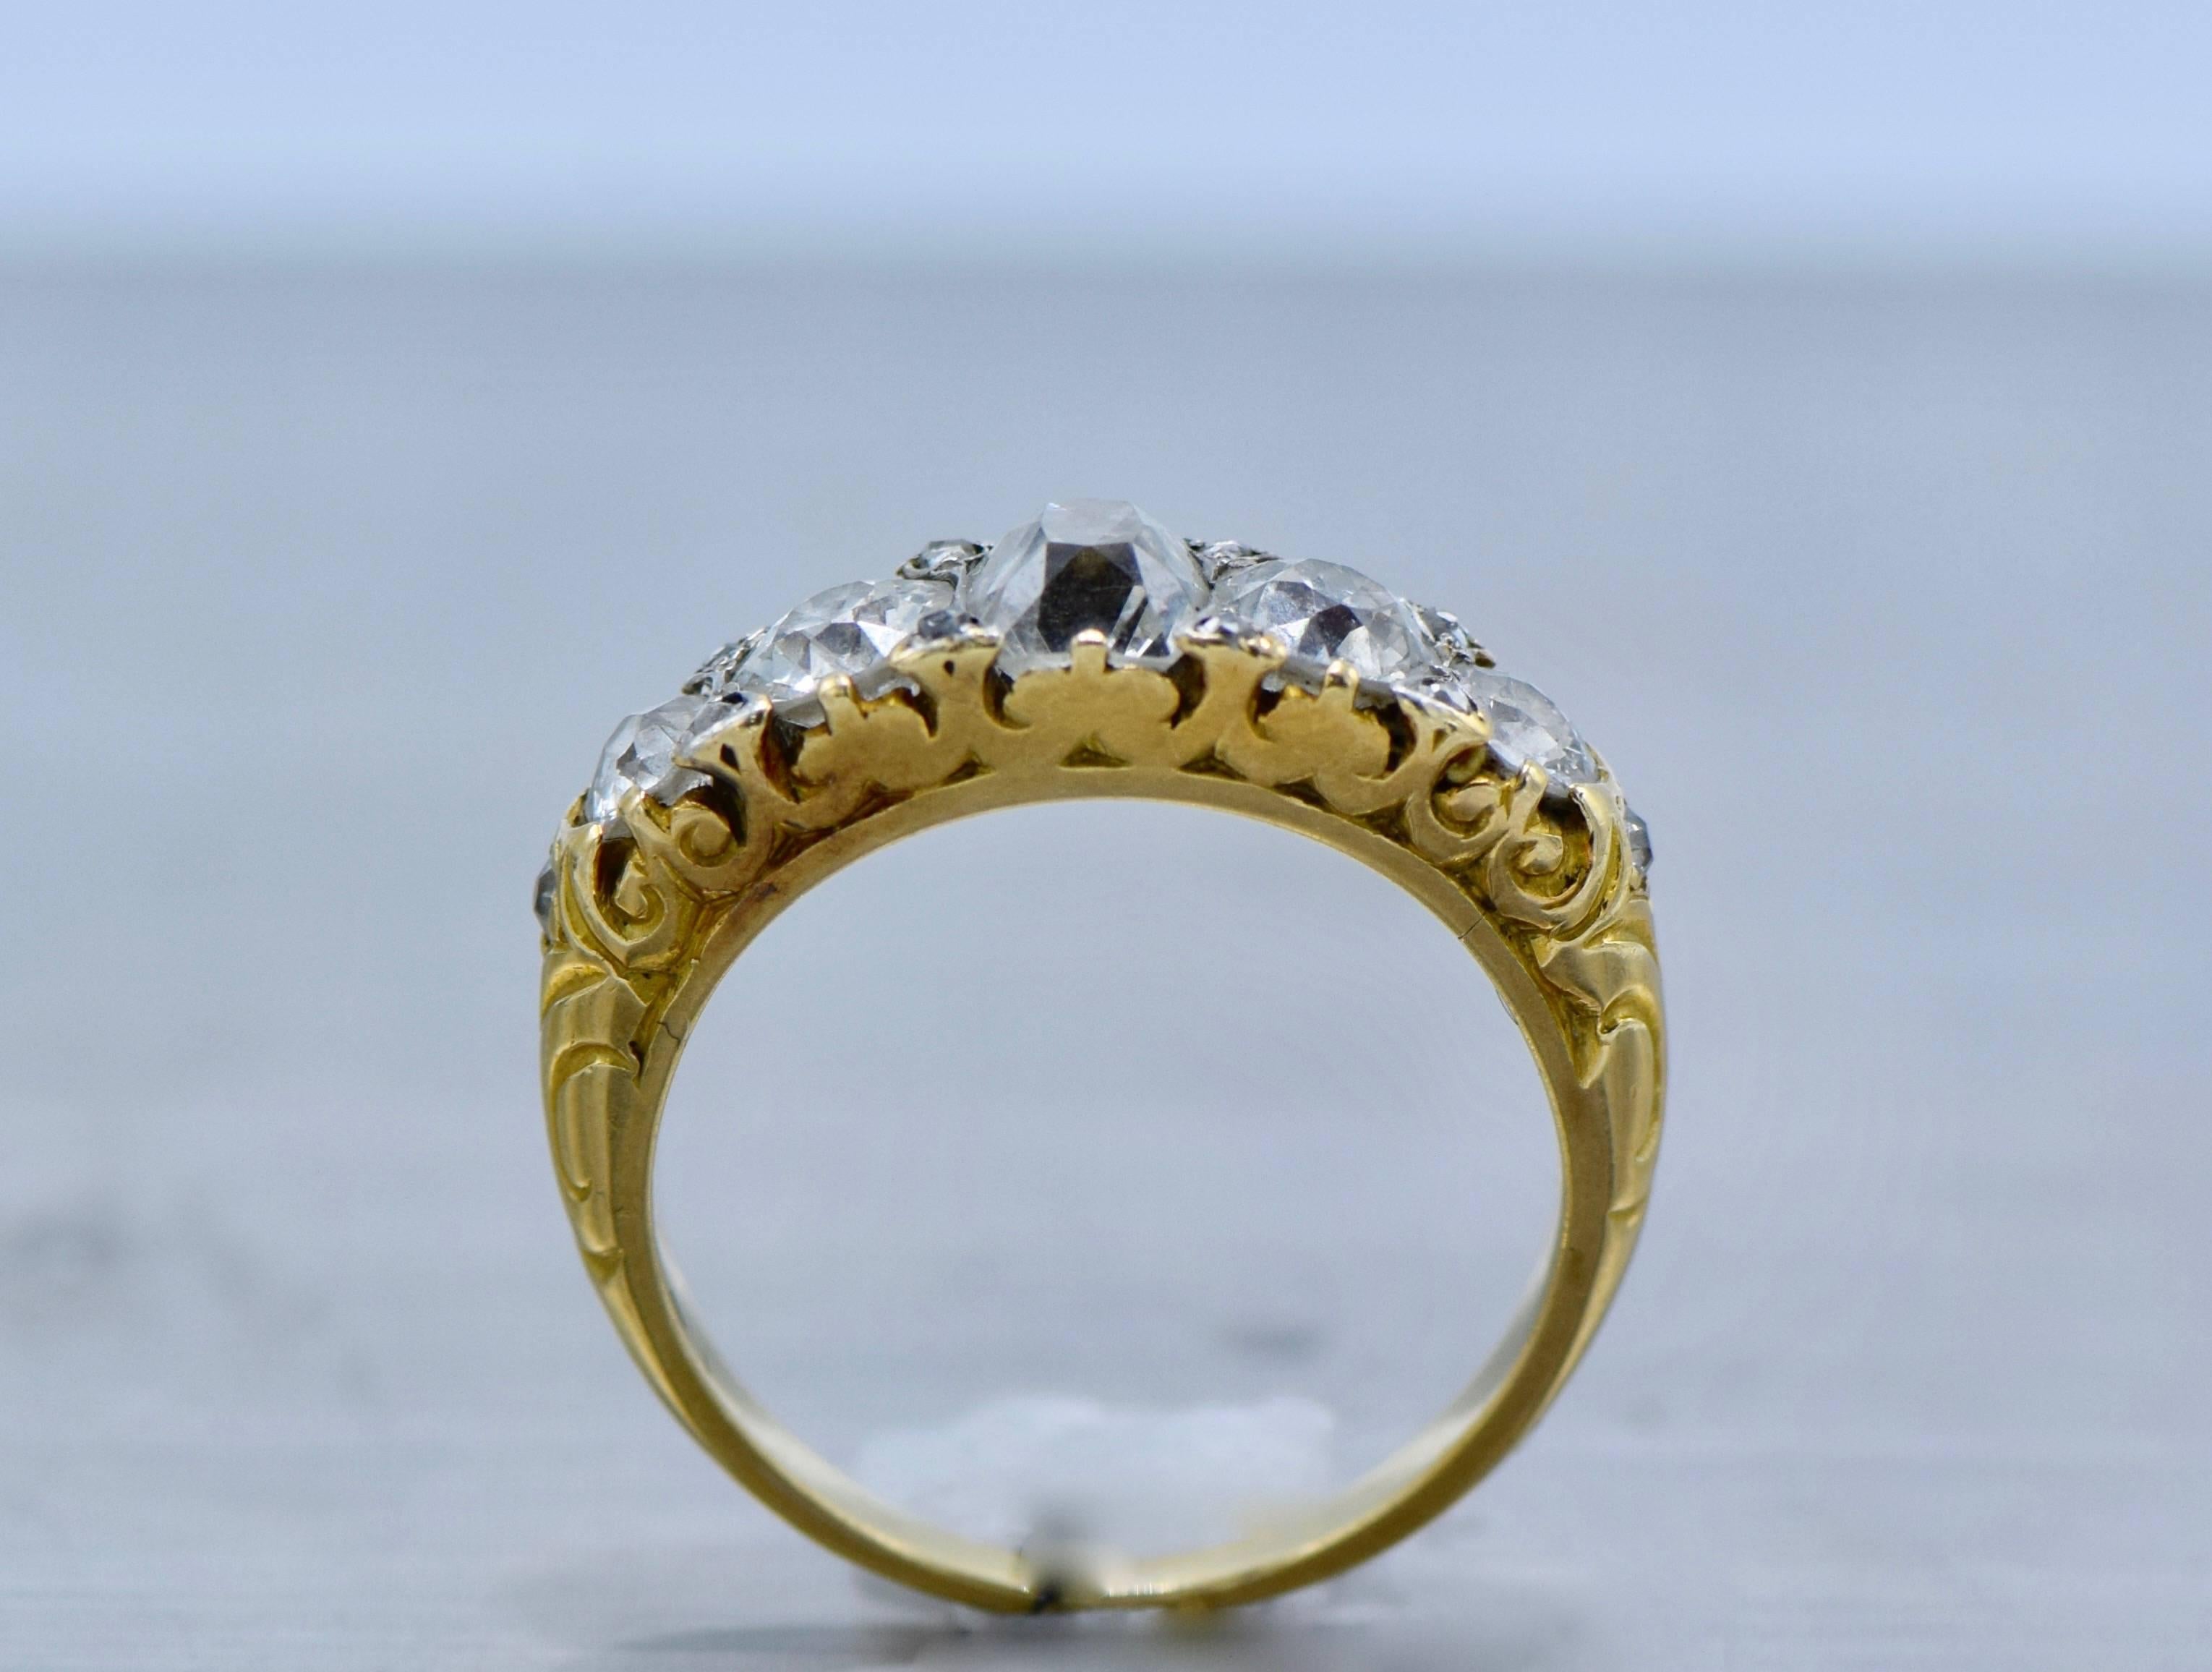 Antique Old-Mine Diamond and Gold Ring

White color: E-F

Clean clarity: Vs 

Diamond weight: 3 Carat 